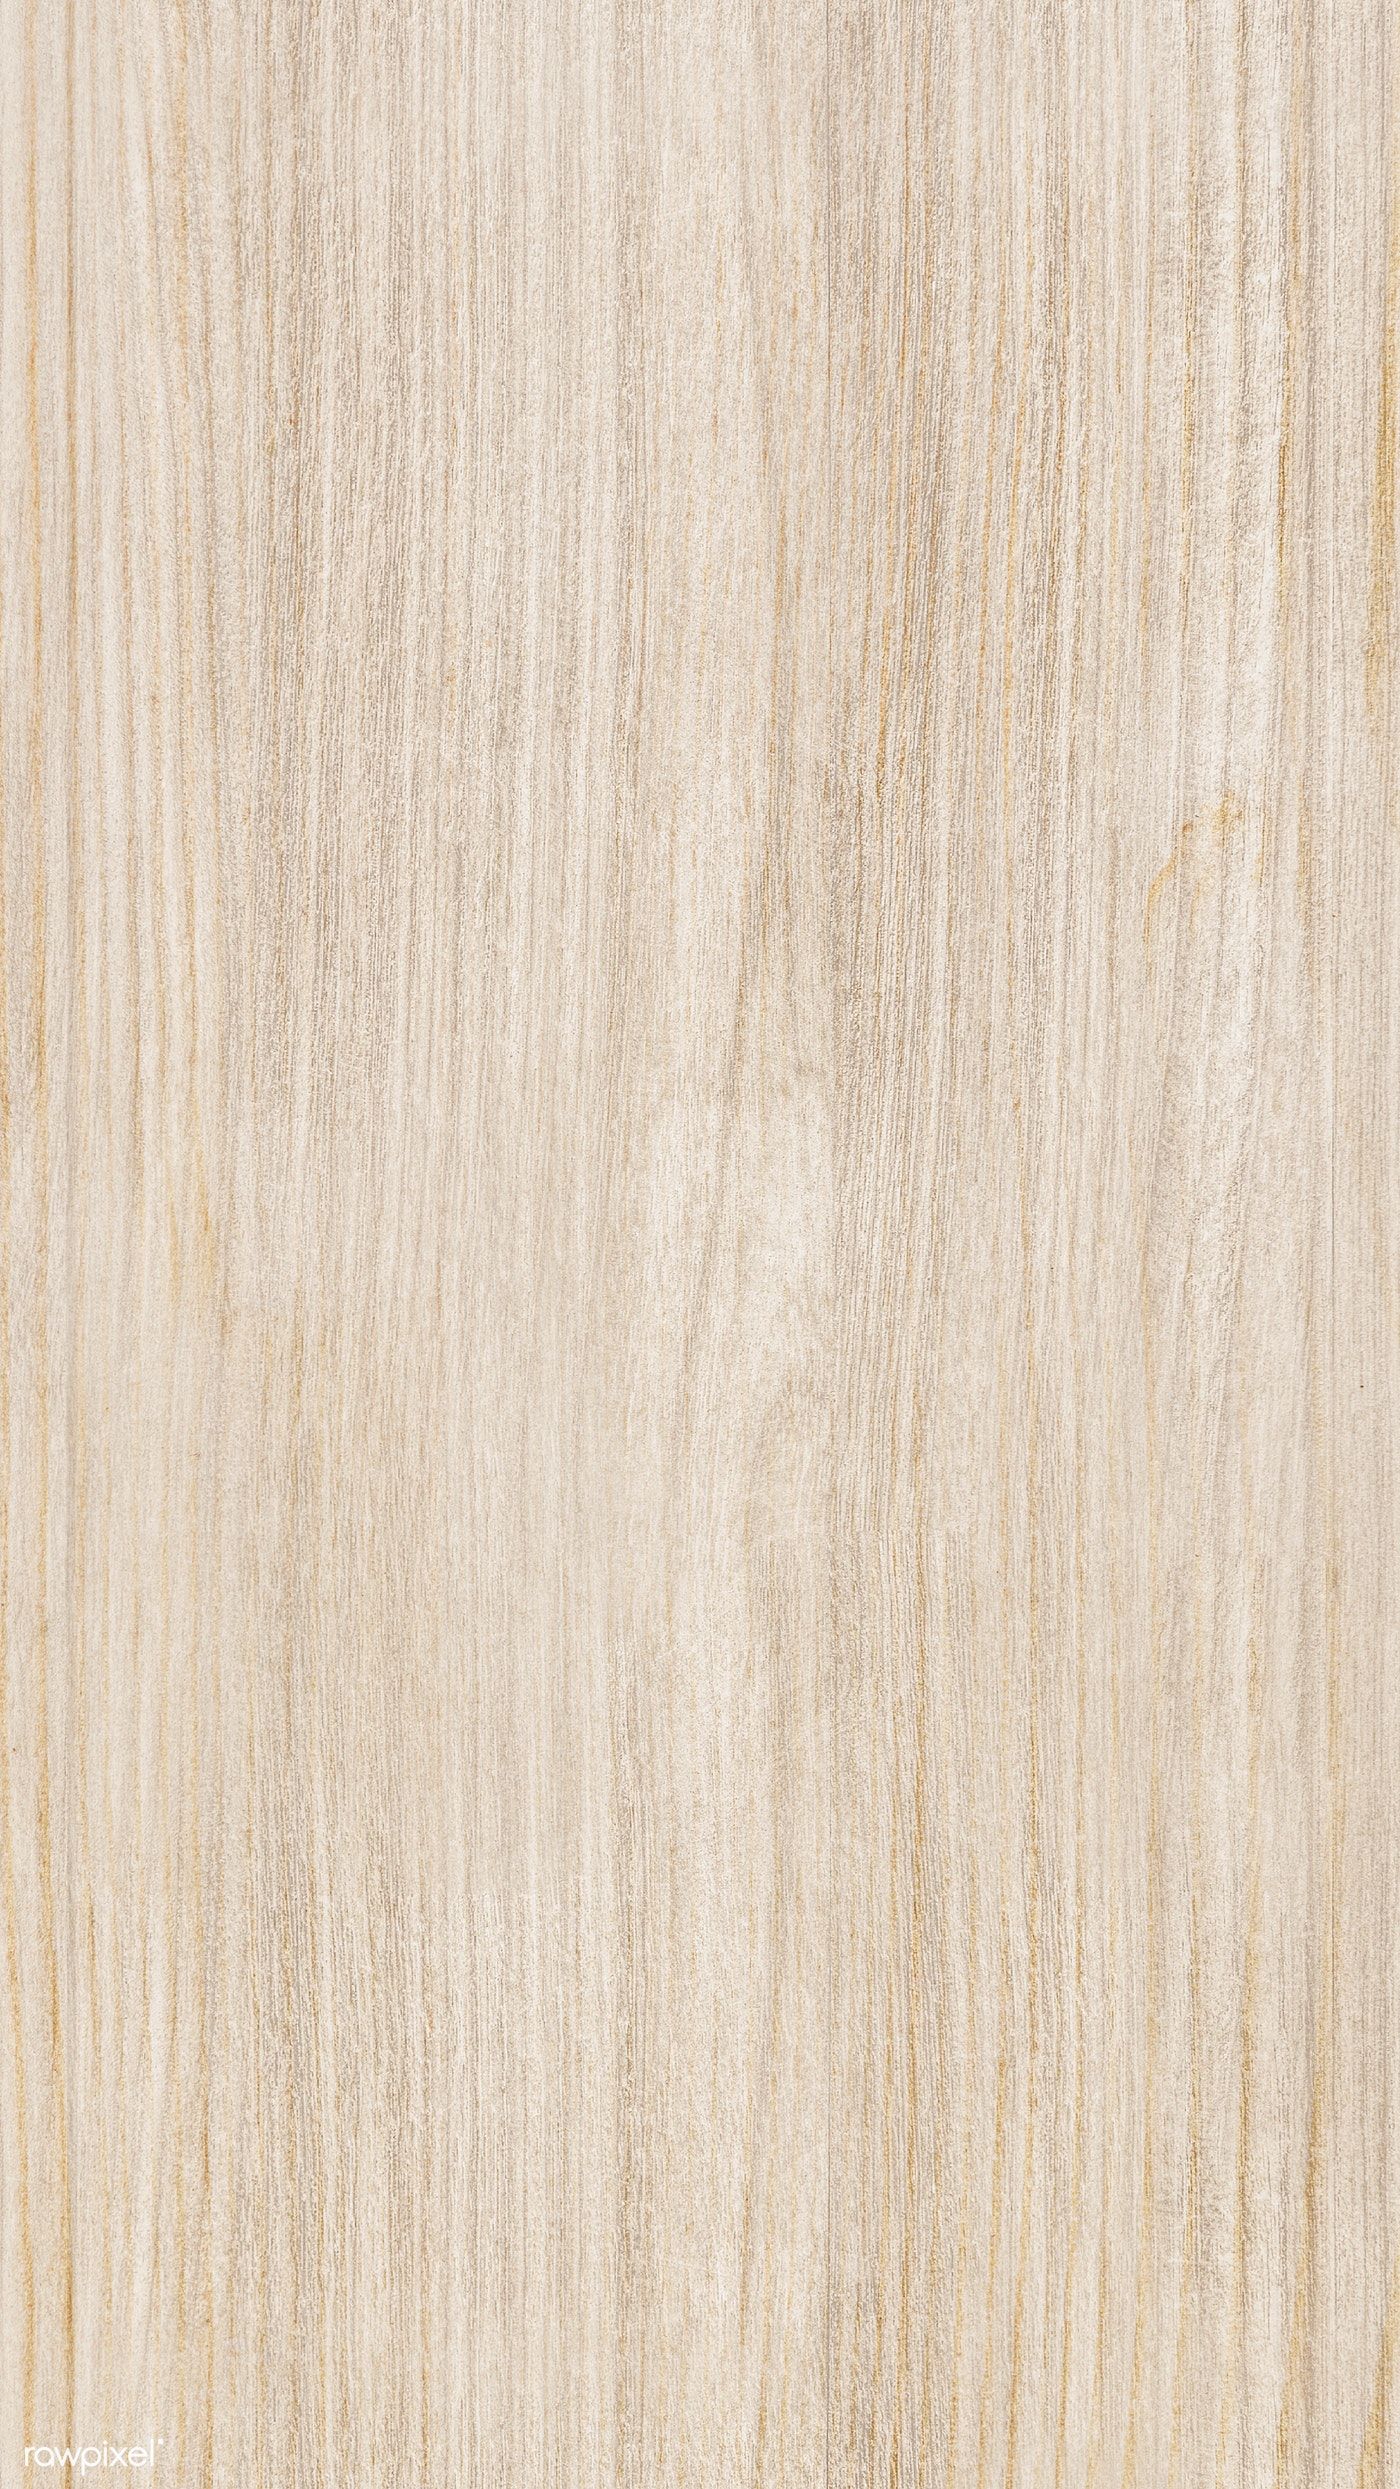 Brown wood textured mobile wallpaper background free image by